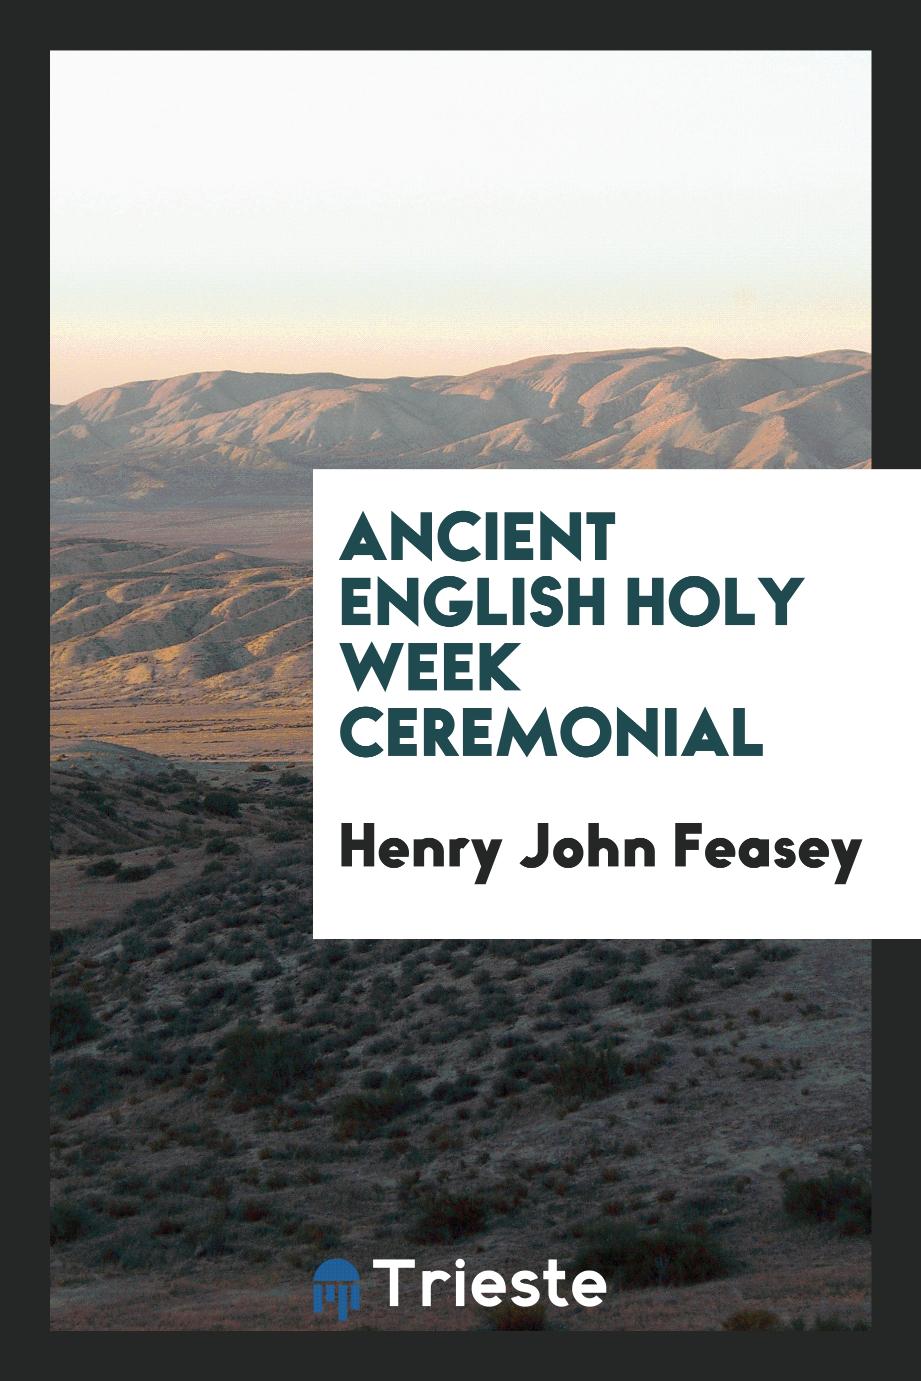 Ancient English Holy week ceremonial